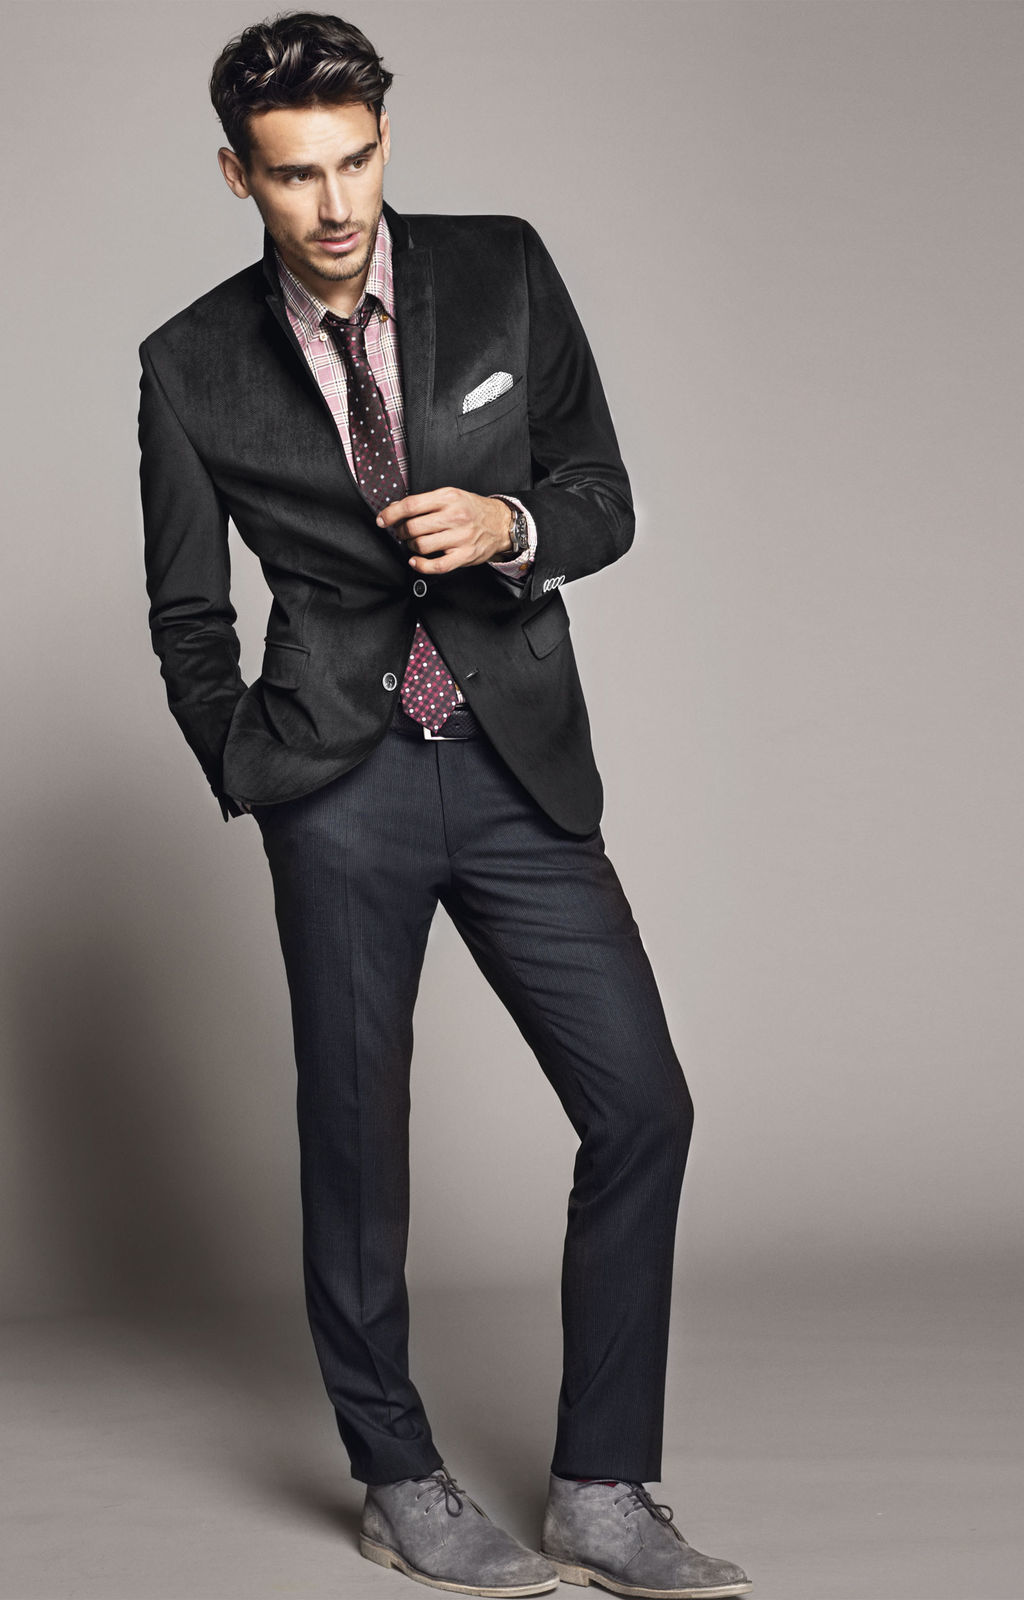 Boys' Black Suit - Classic Slim Fit for Formal Occasions | Malcolm Royce